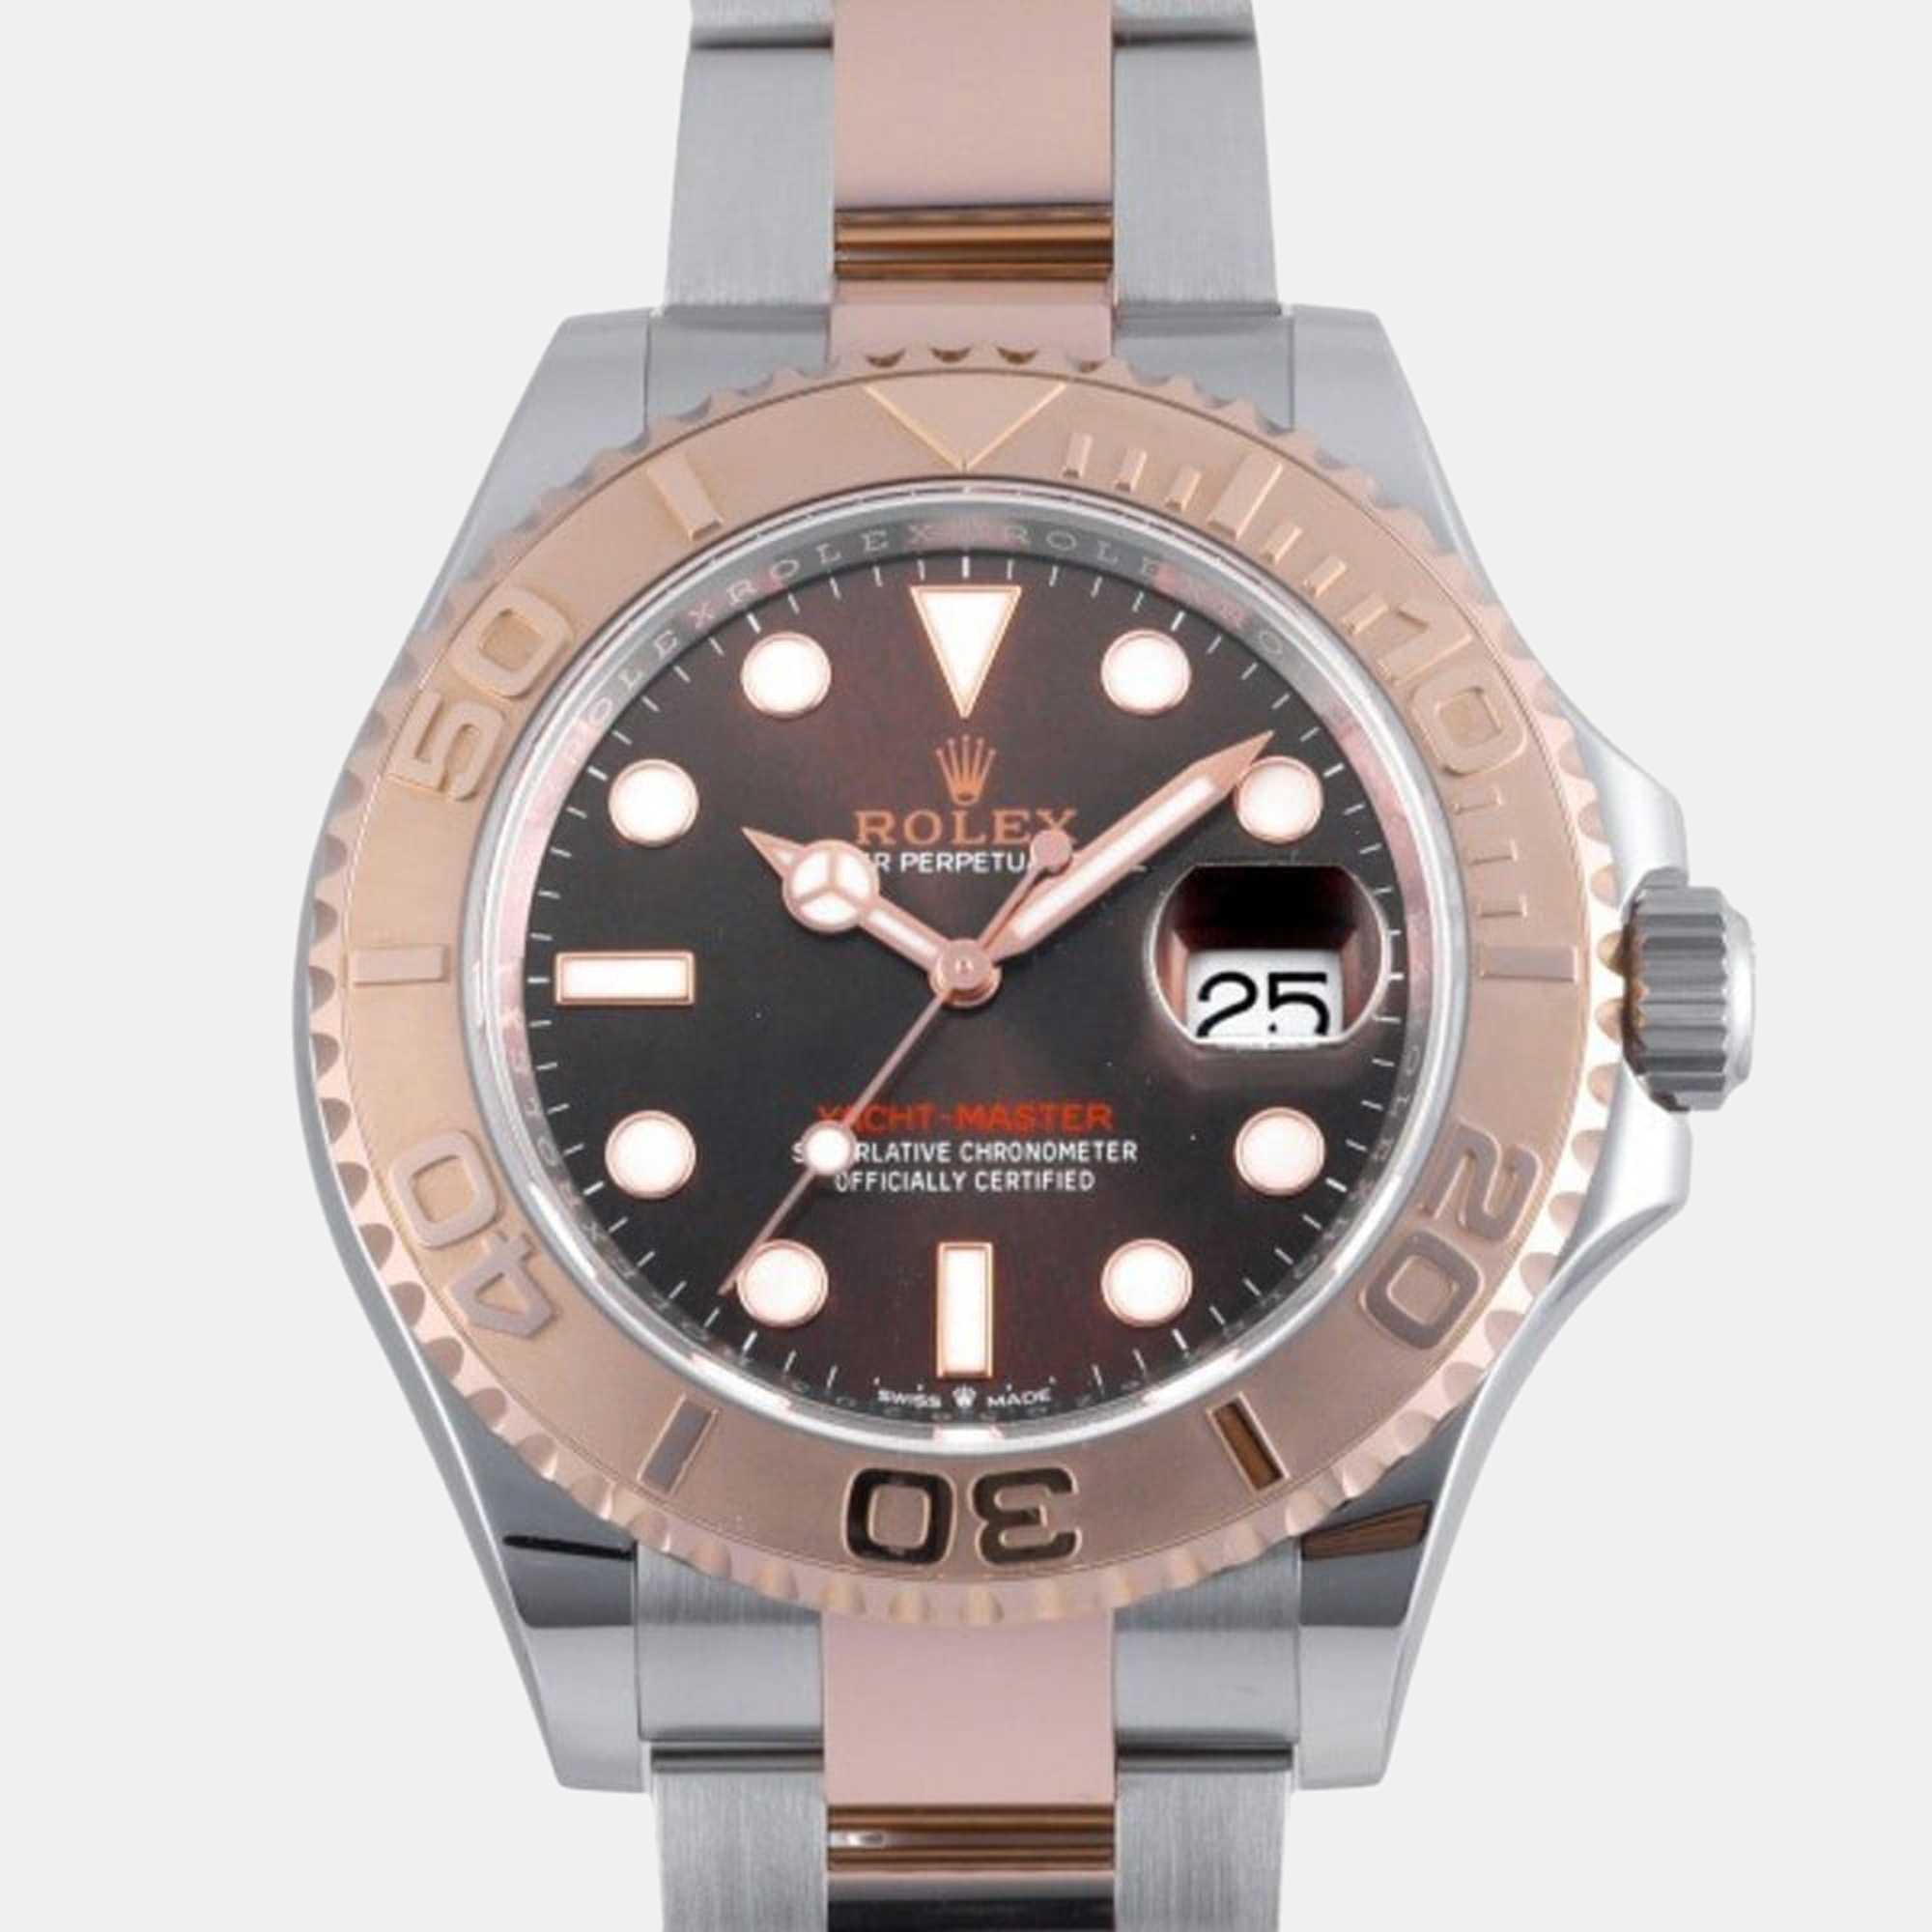 Rolex Brown 18k Rose Gold And Stainless Steel Yacht-Master 126621 Automatic Men's Wristwatch 40 Mm